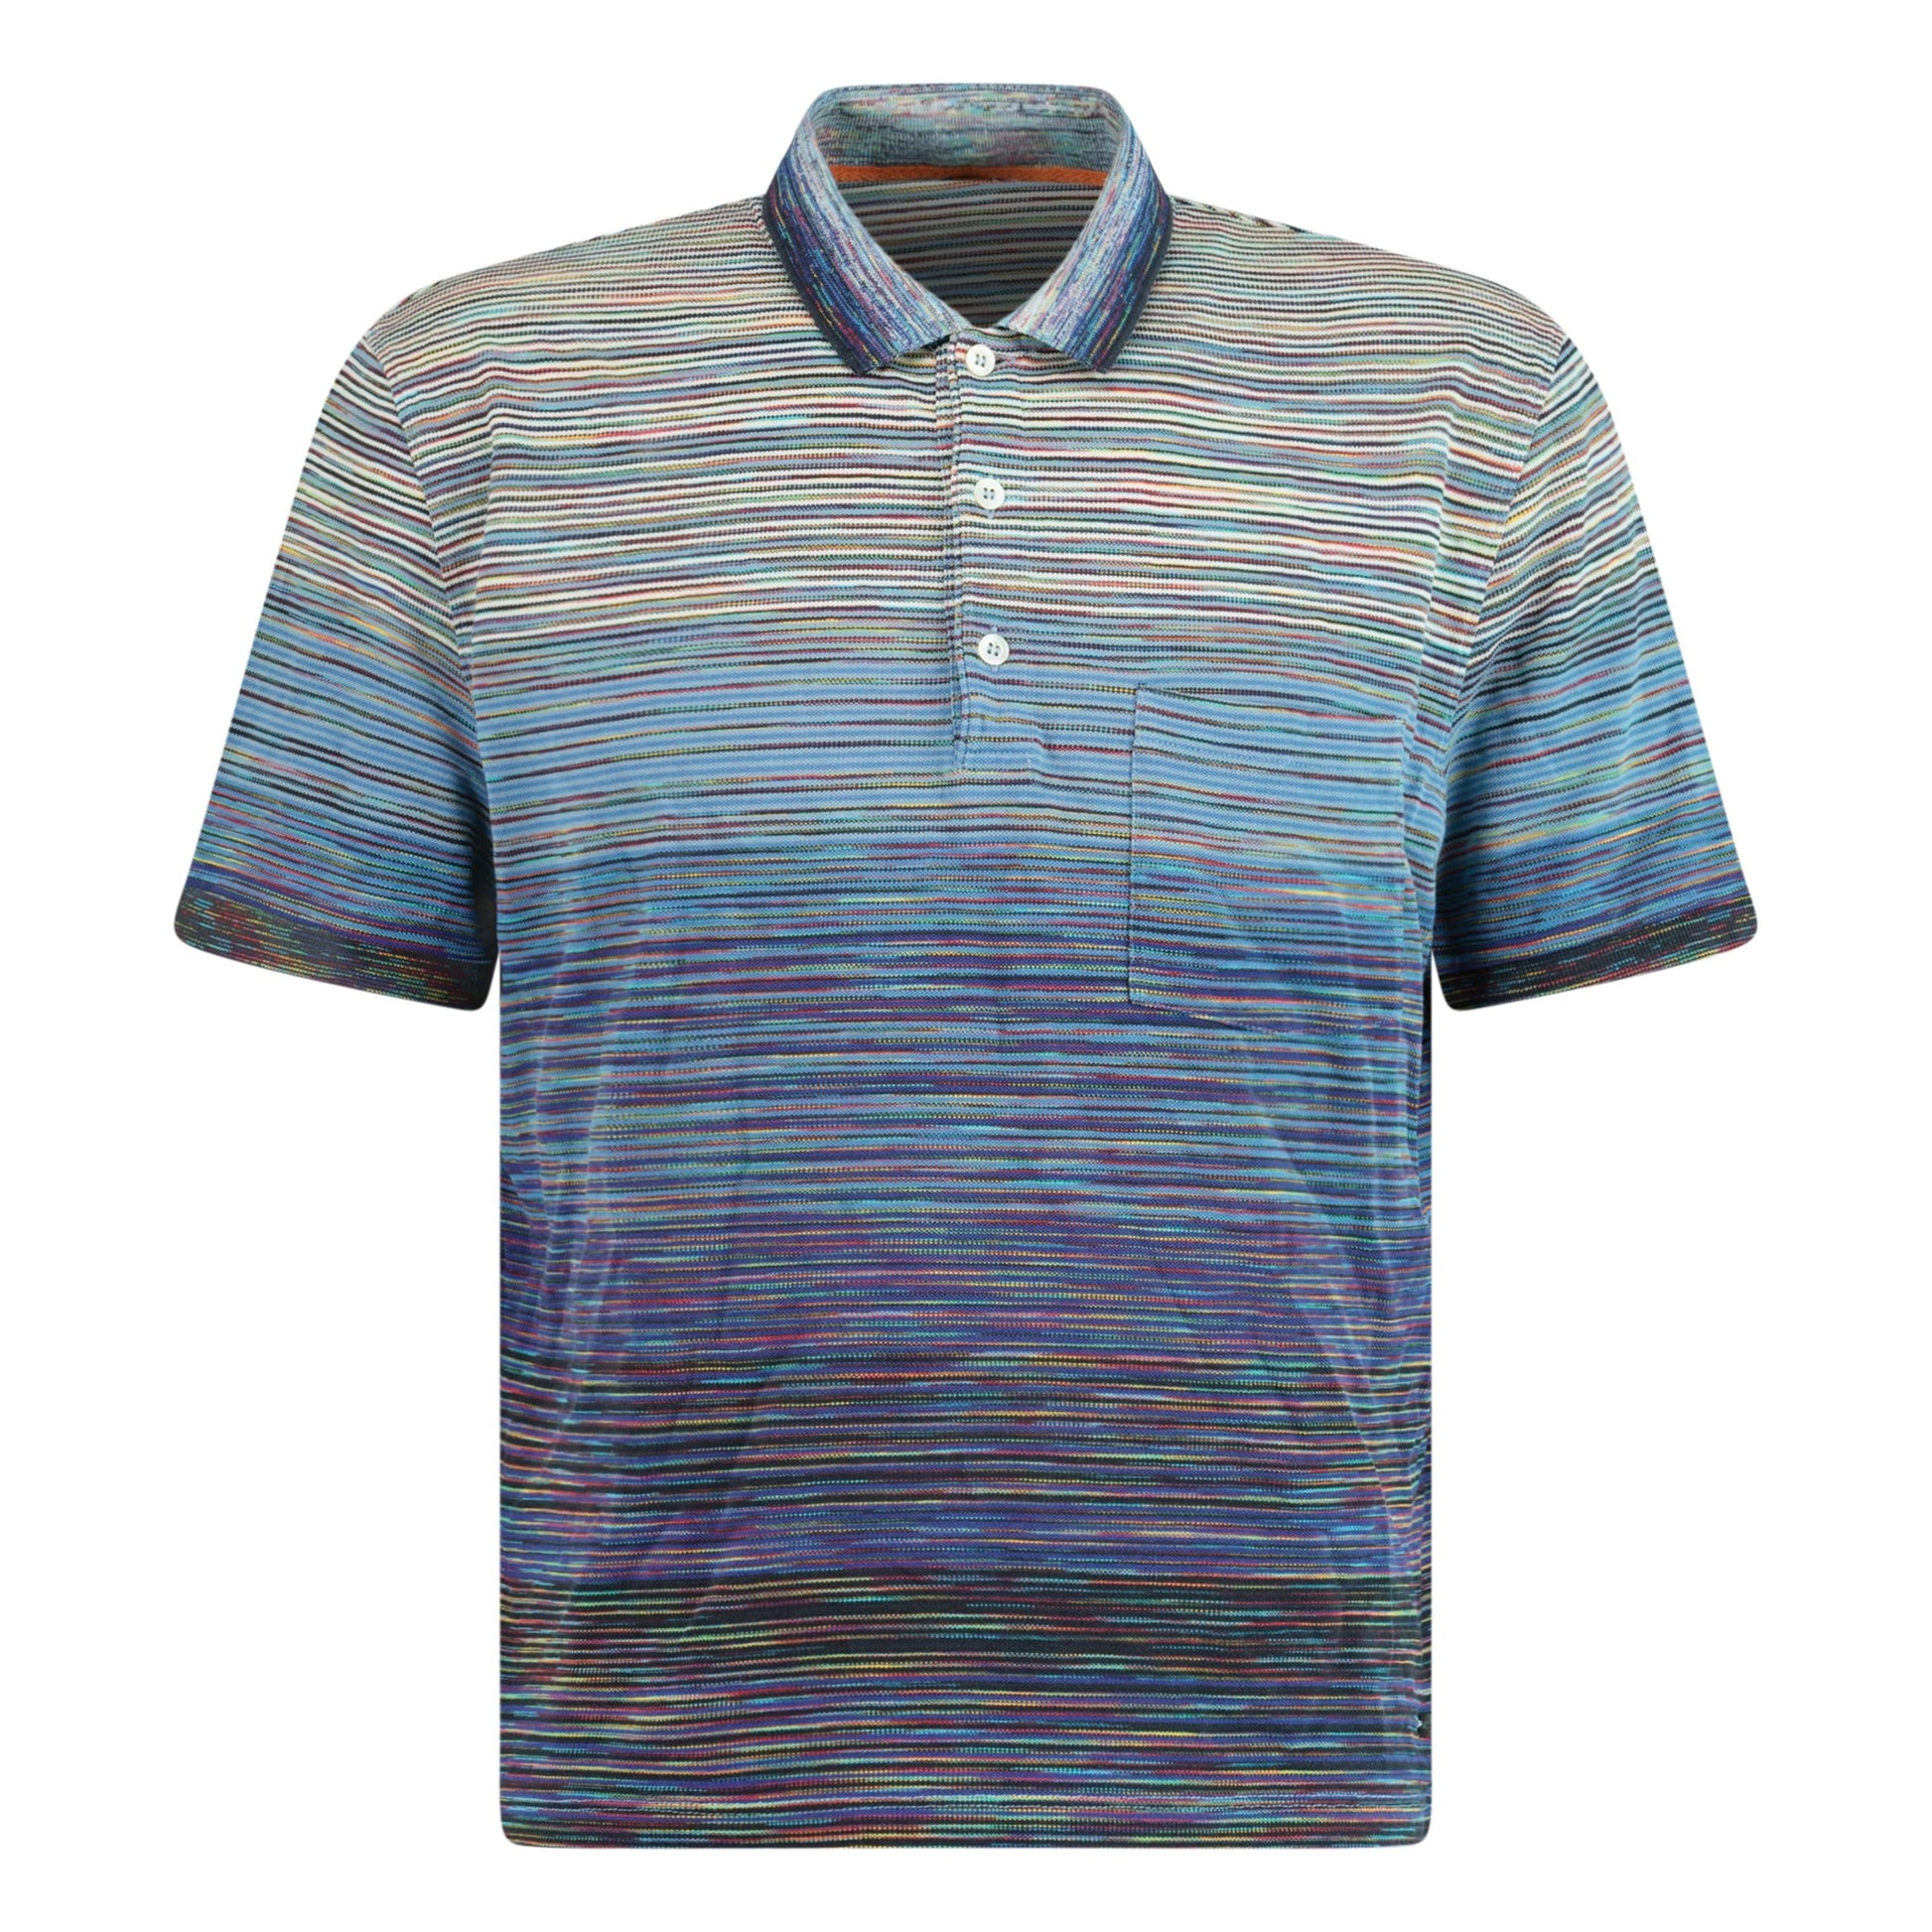 MISSONI BLUE STRIPED POLO - XL (Fits S) - affluentarchivesUsed HIGH END DESIGNER CLOTHING